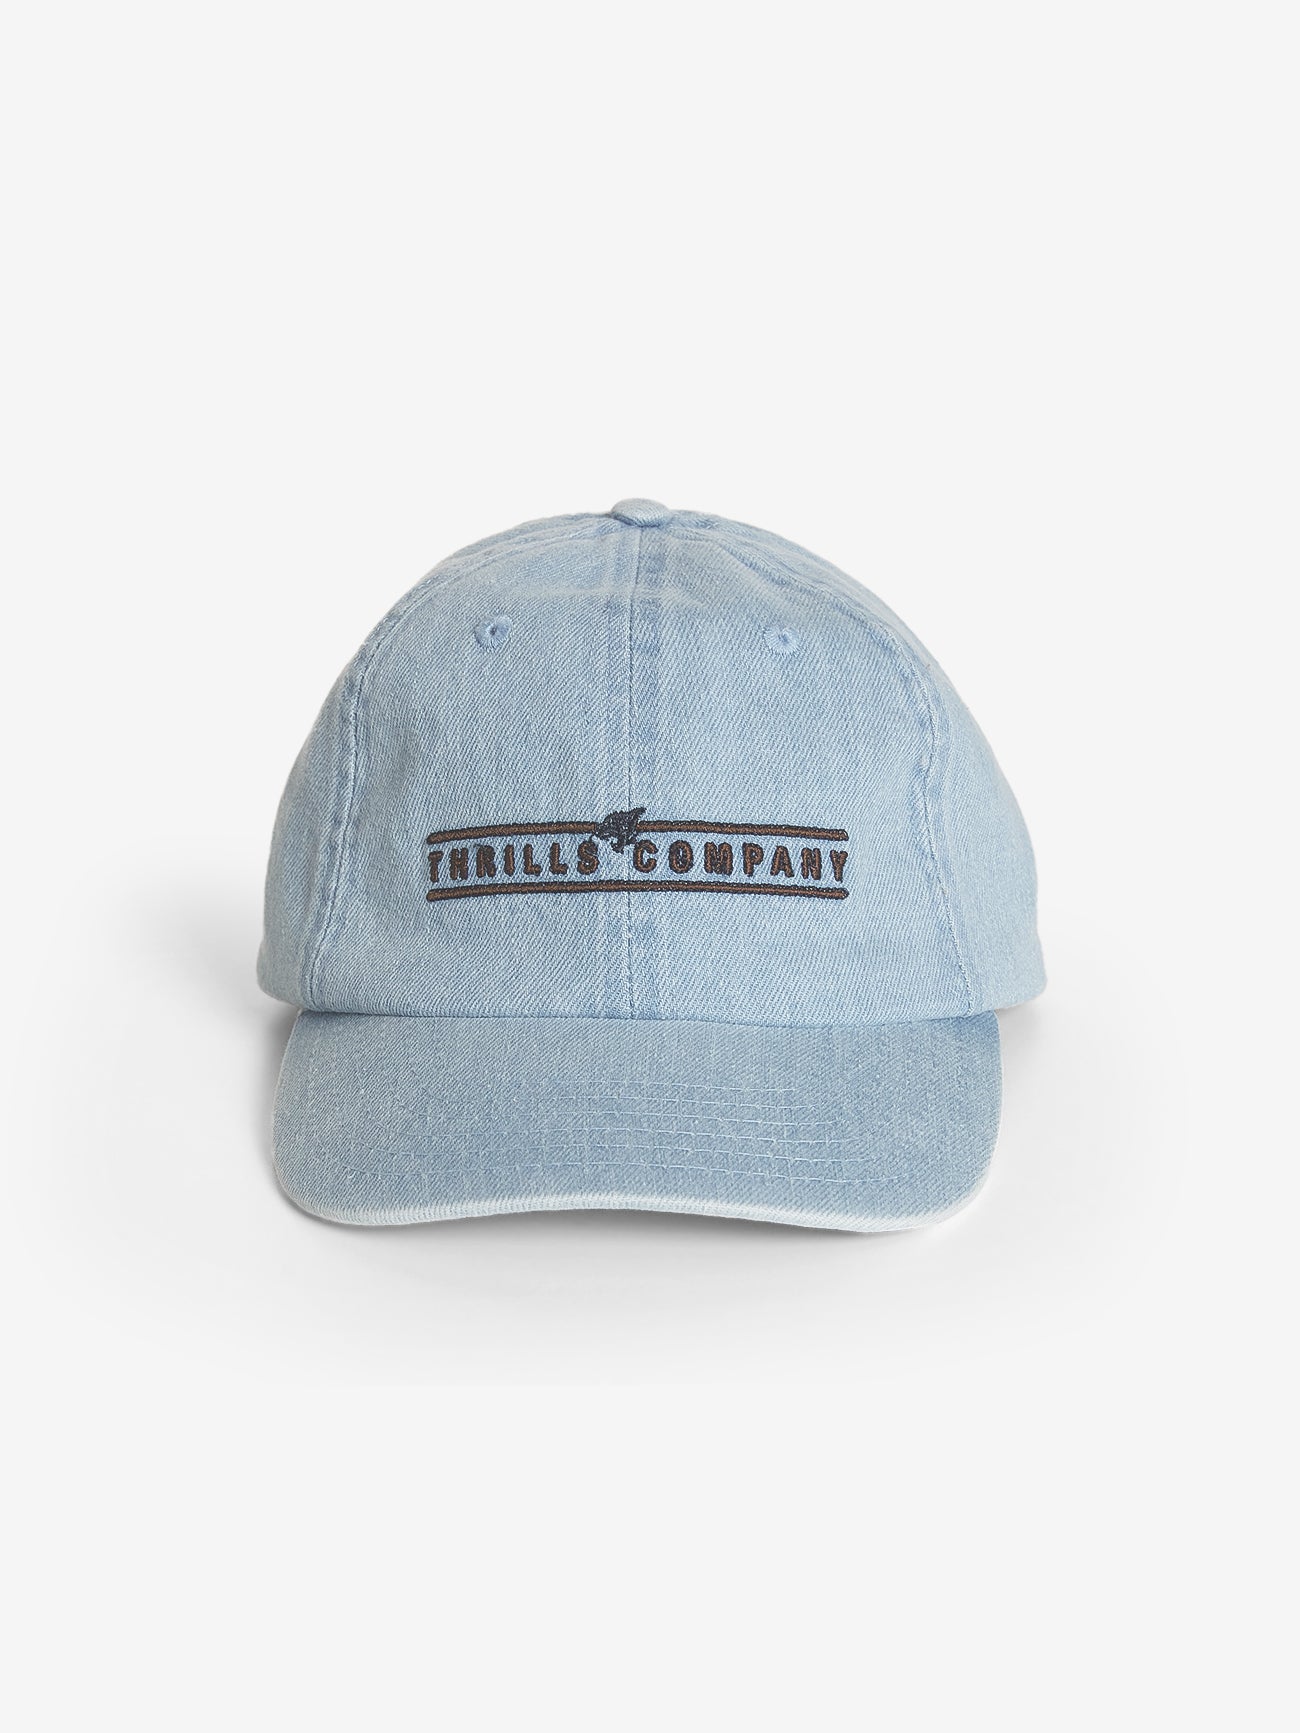 Full Court Press Hat - Endless Blue One Size